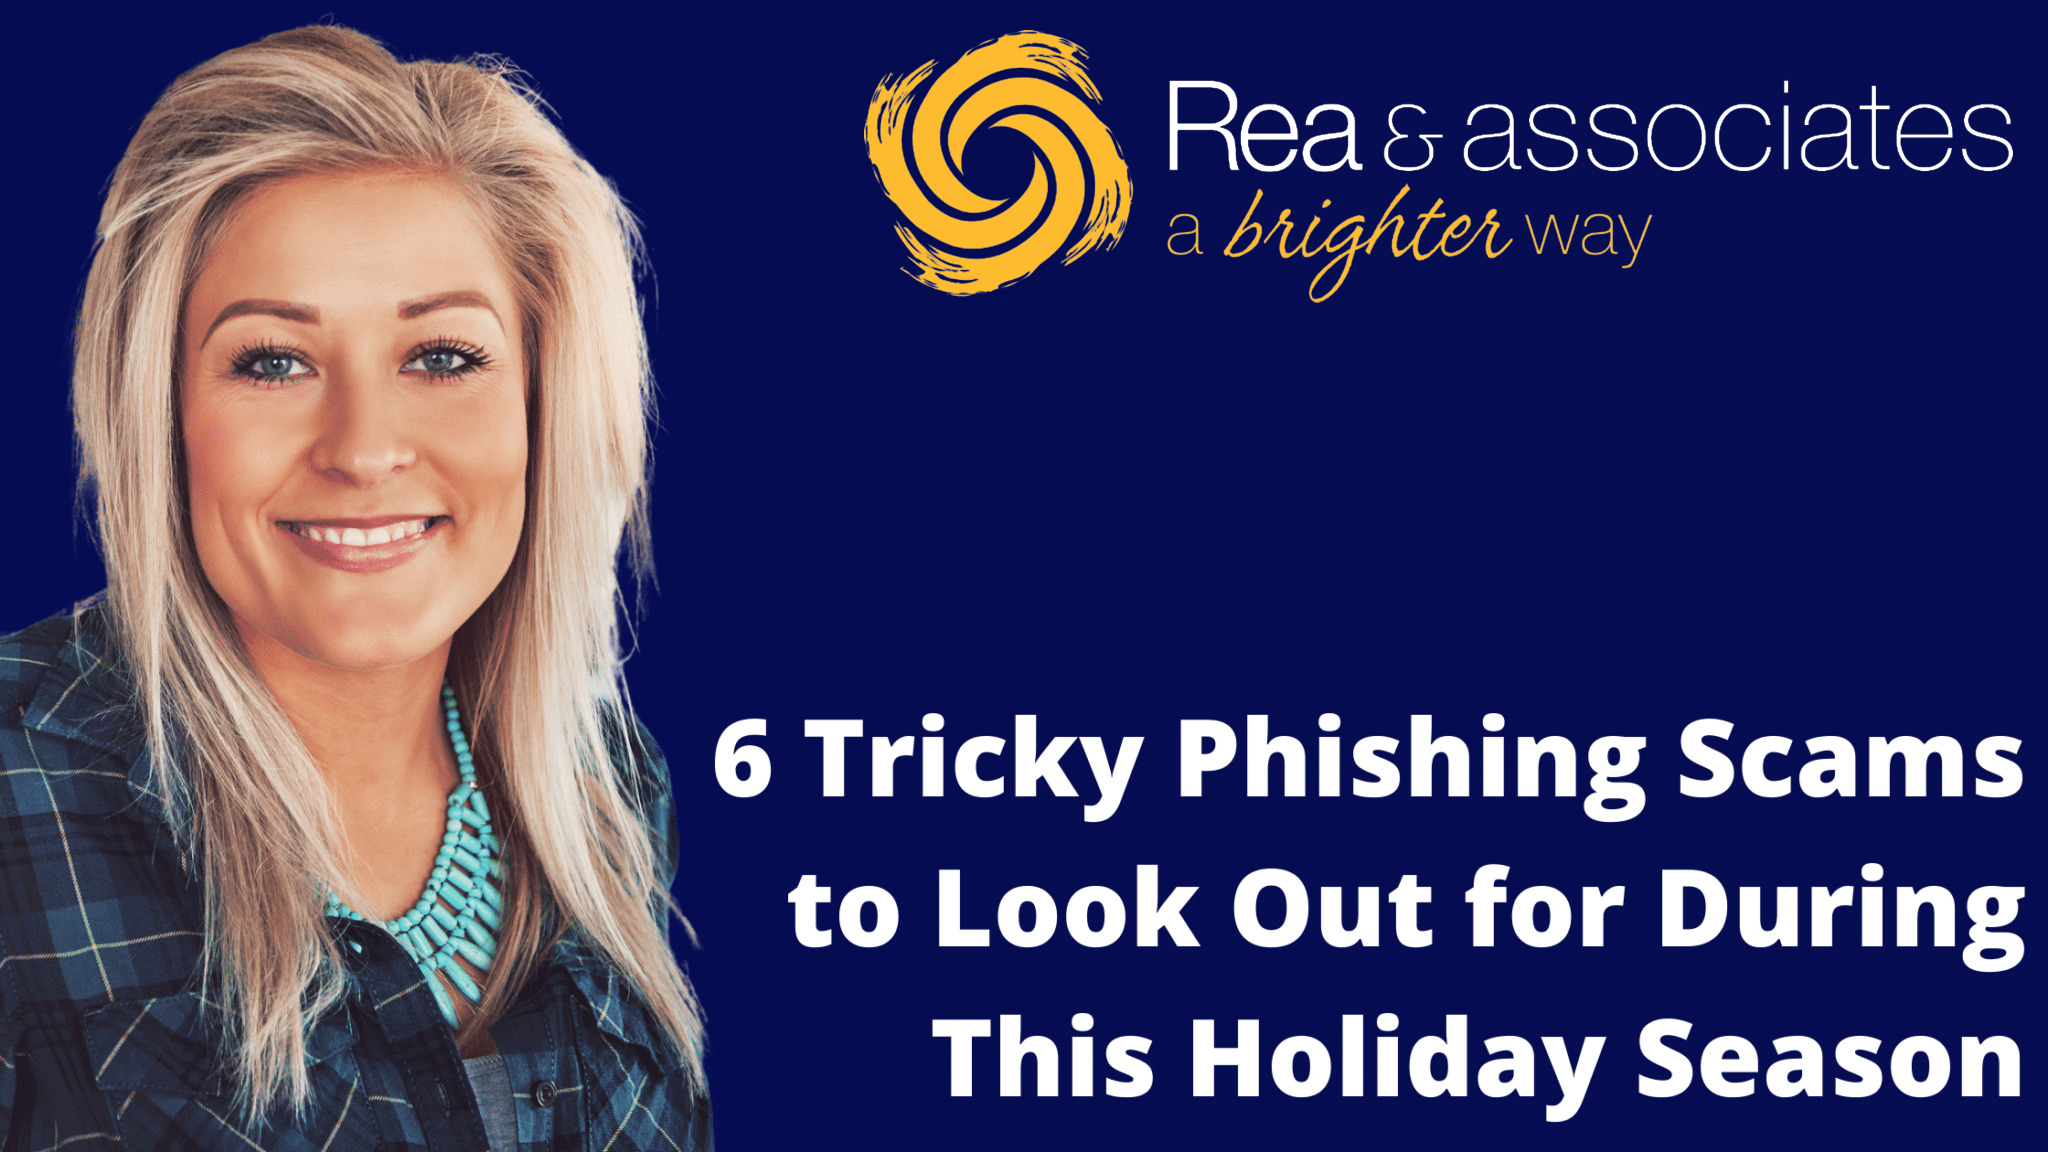 6 Tricky Phishing Scams to Look Out for During This Holiday Season